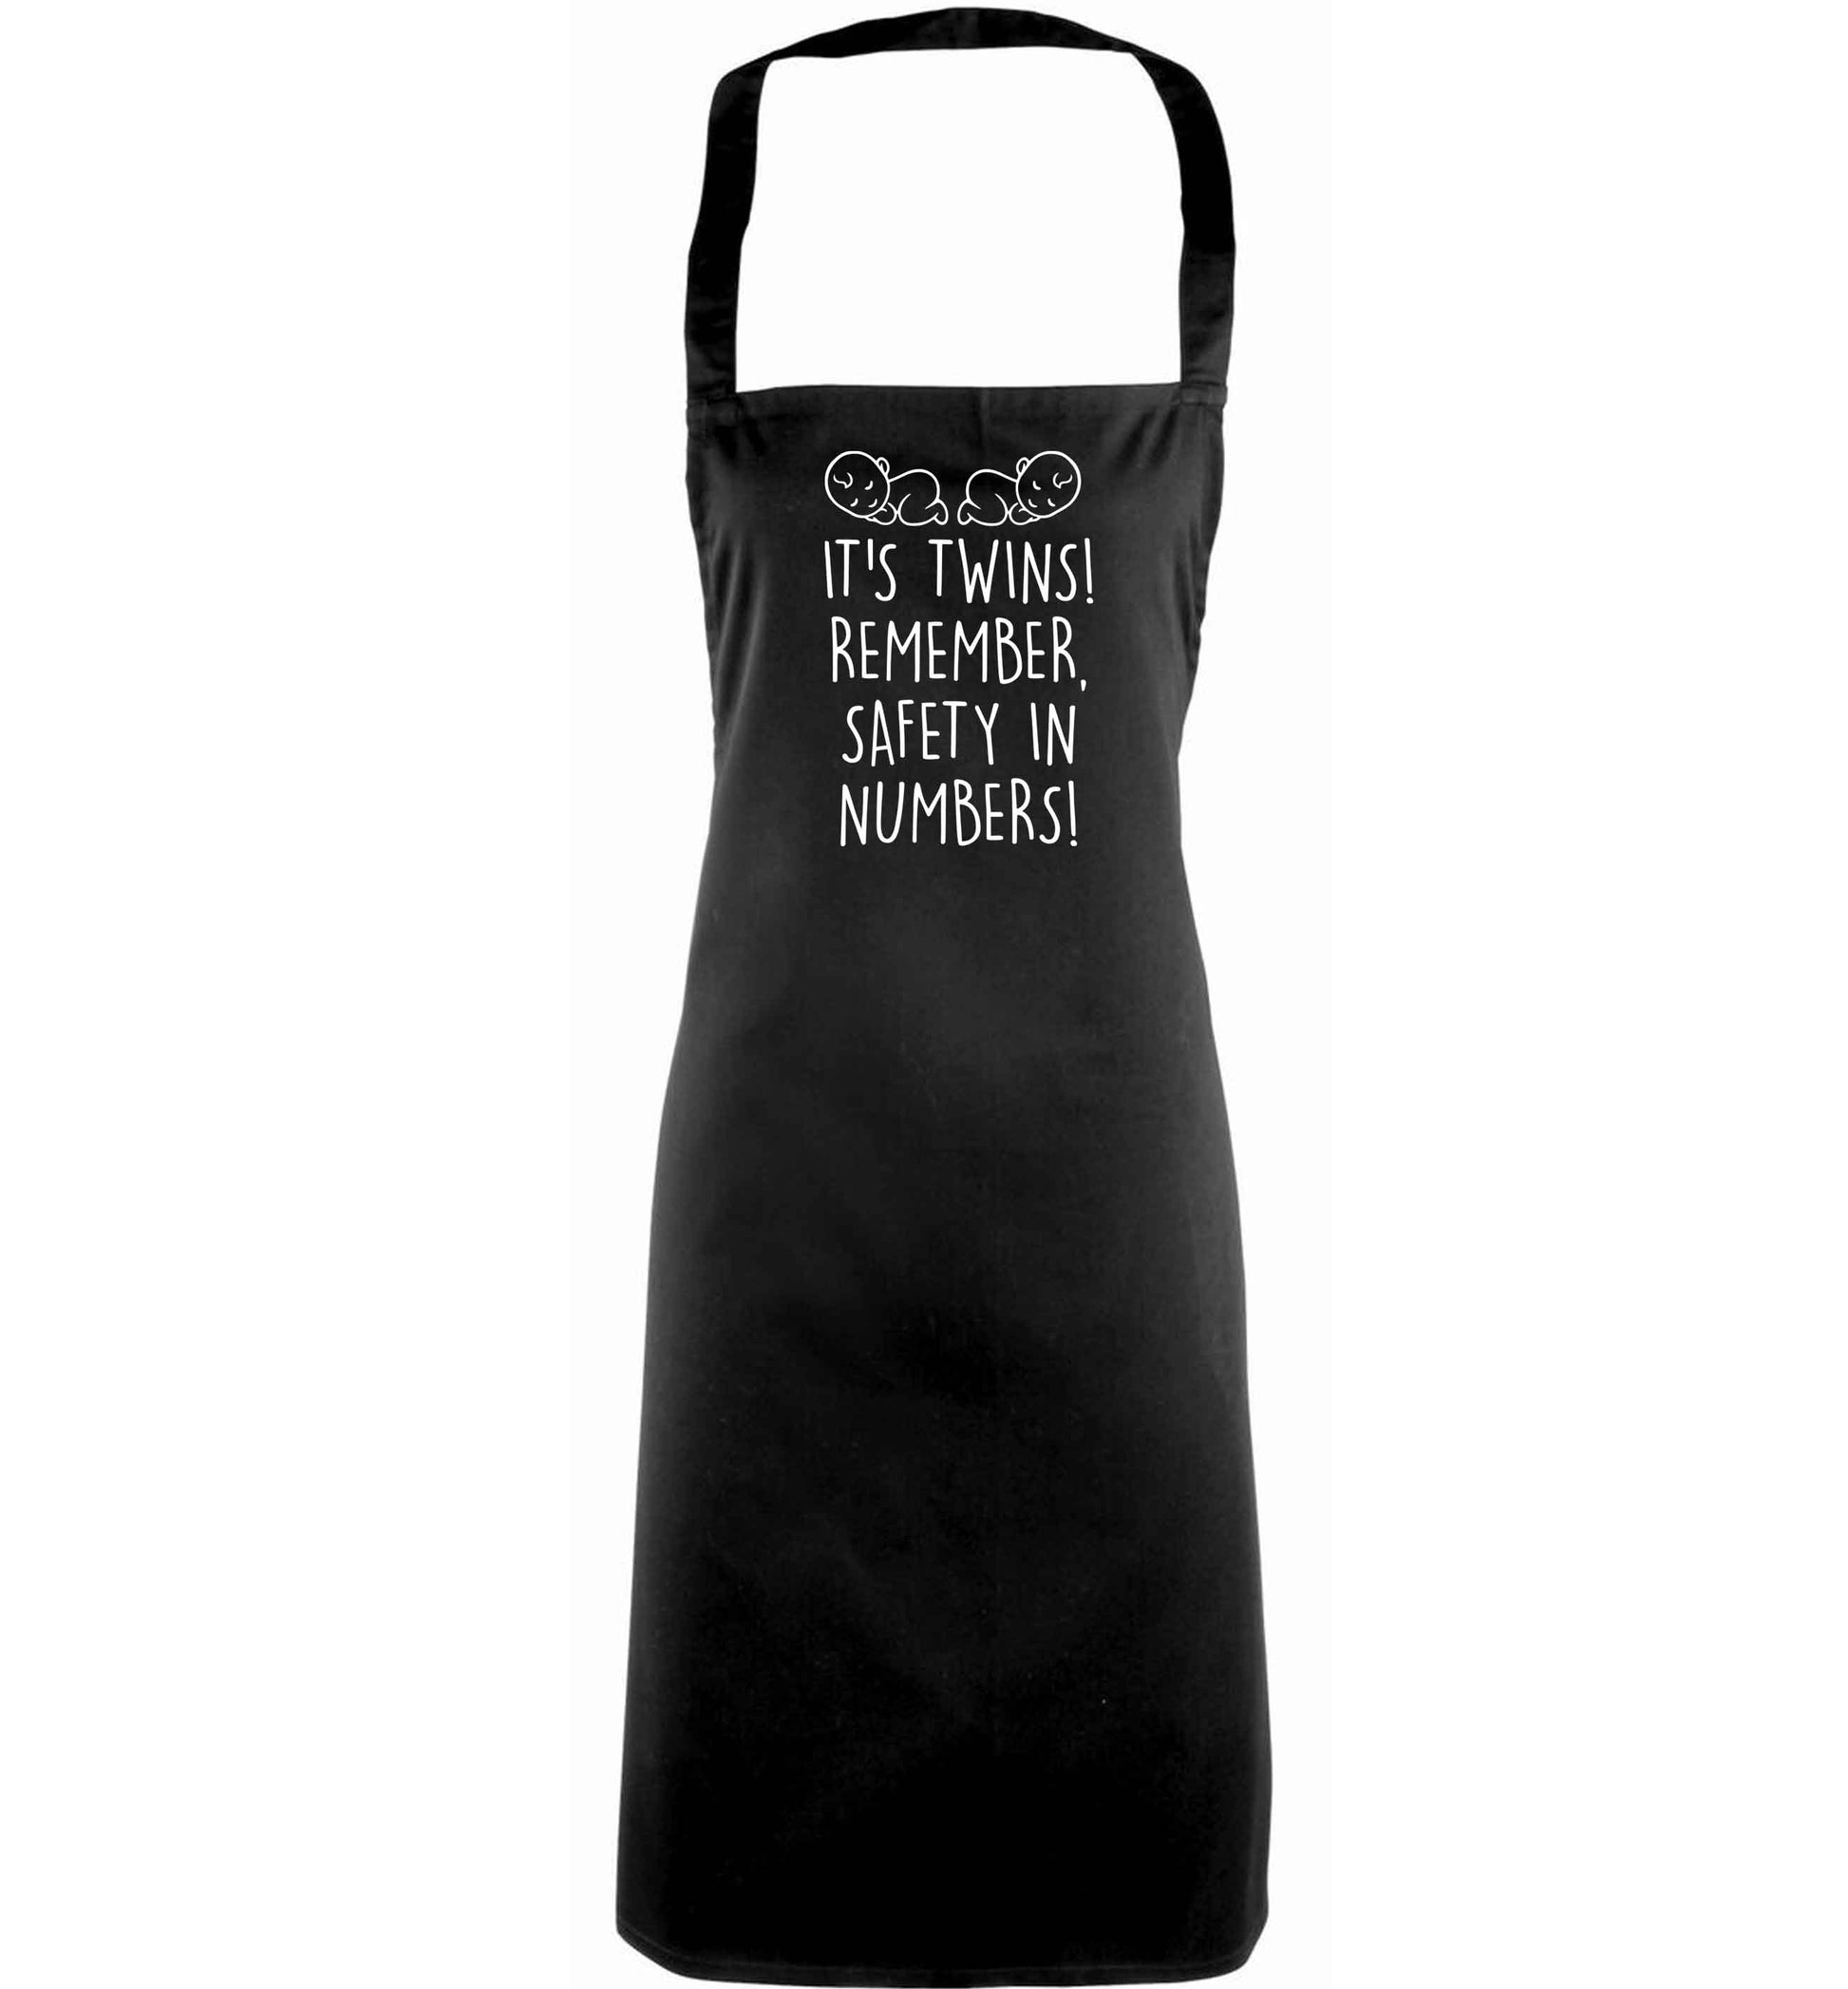 It's twins! Remember safety in numbers! adults black apron